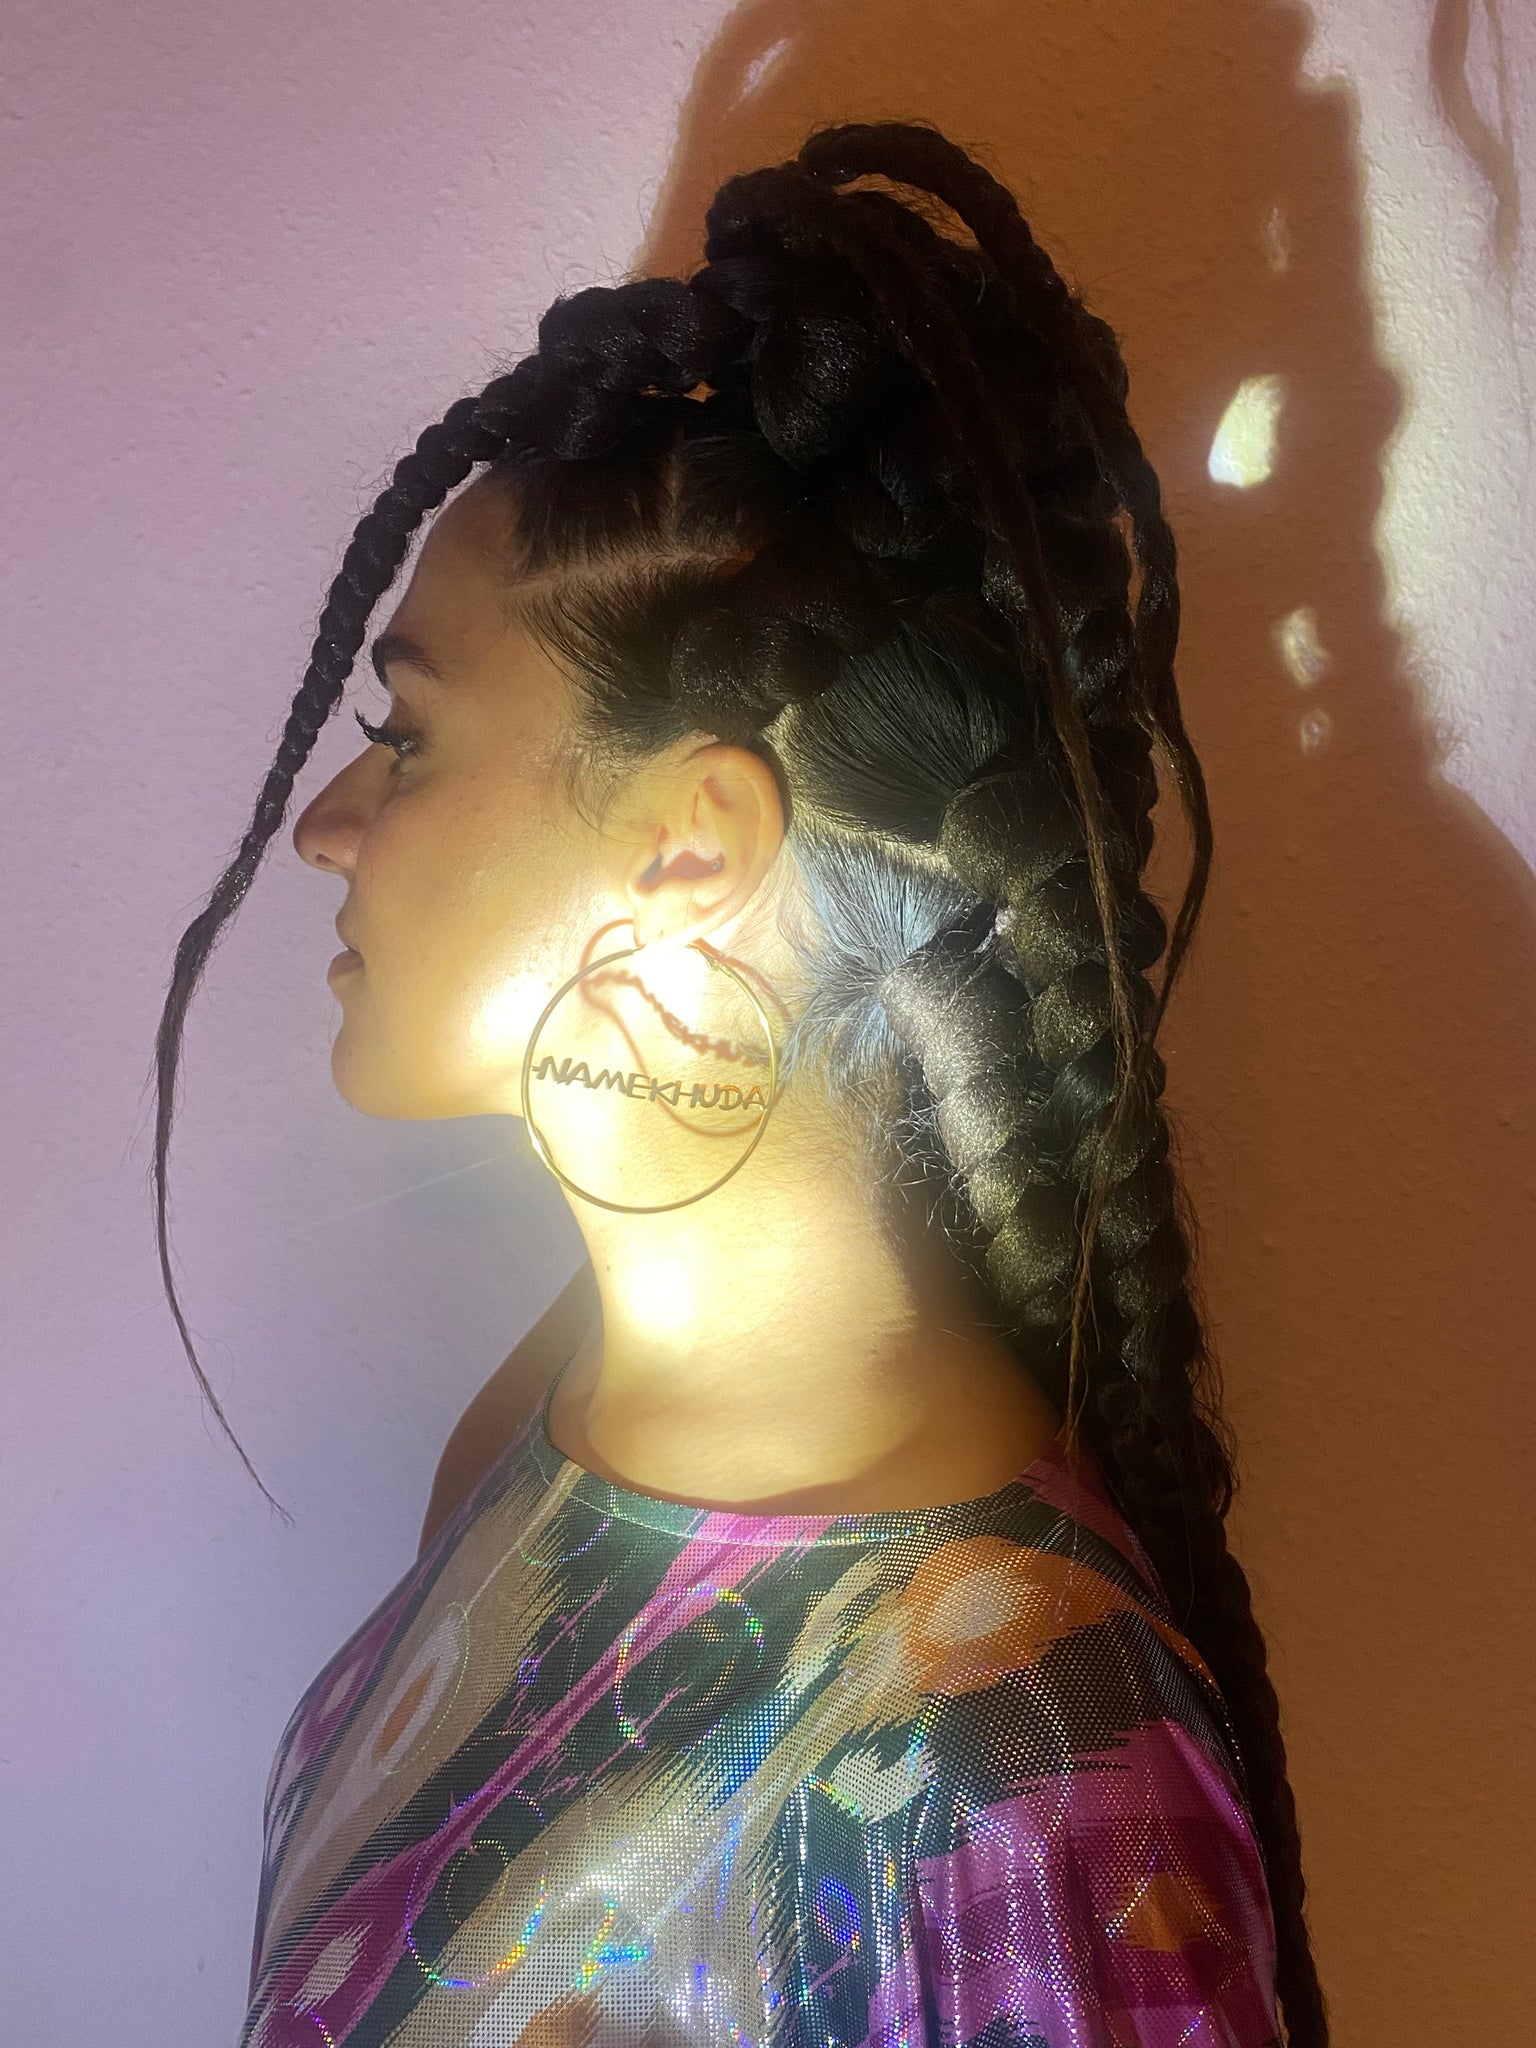 A woman's profile showing her wearing big gold hoops.